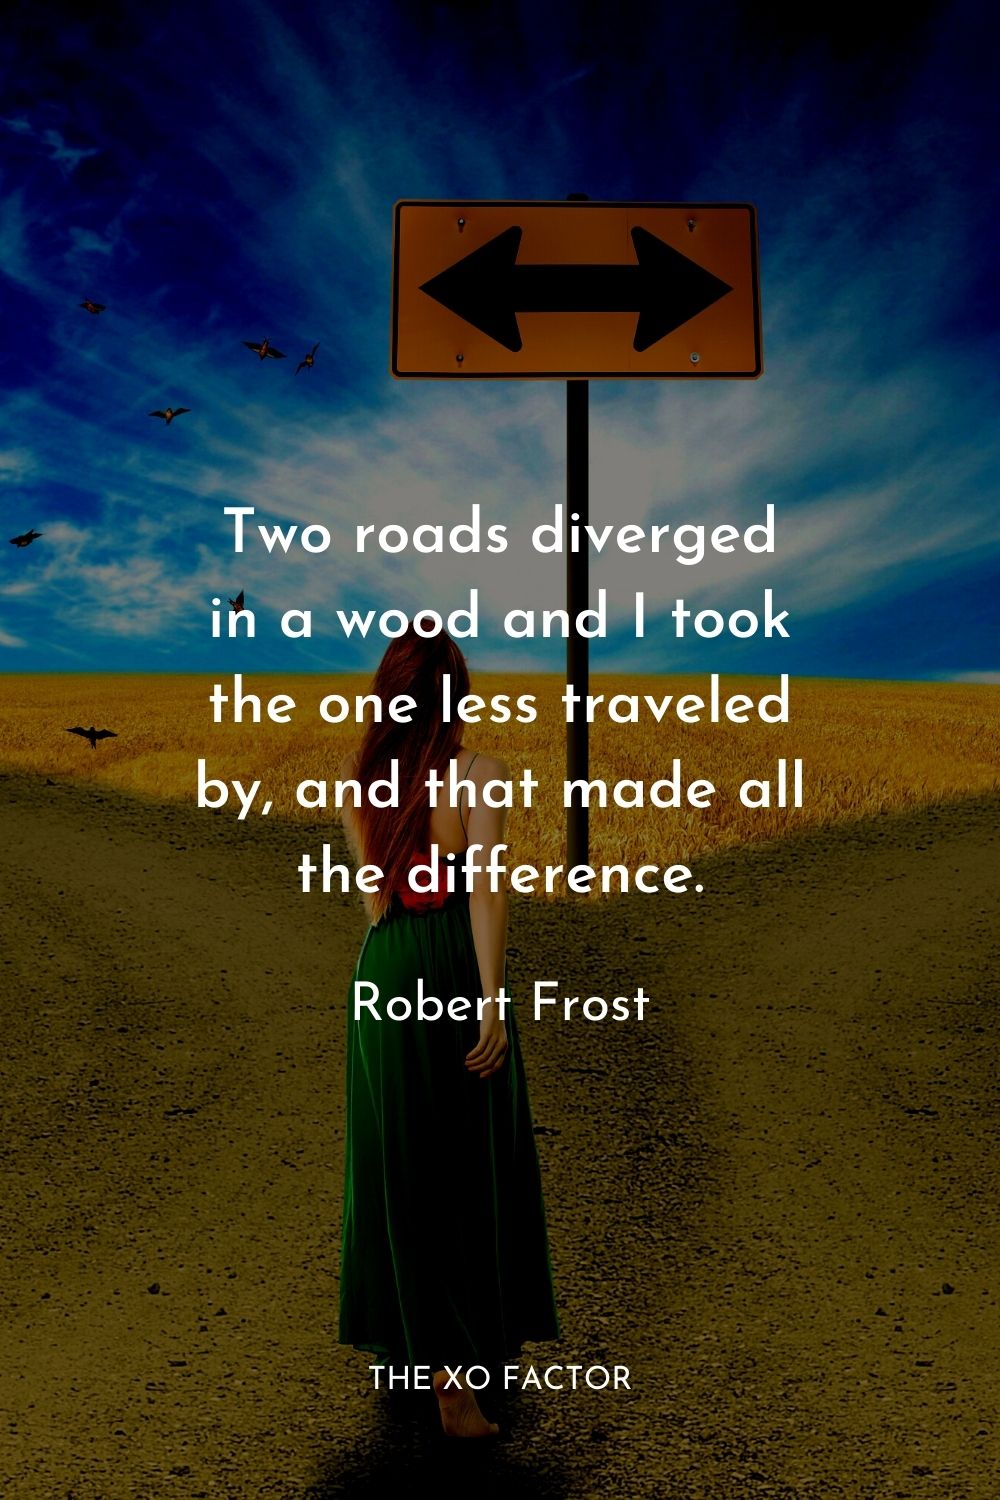 Two roads diverged in a wood and I  took the one less traveled by, and that made all the difference.